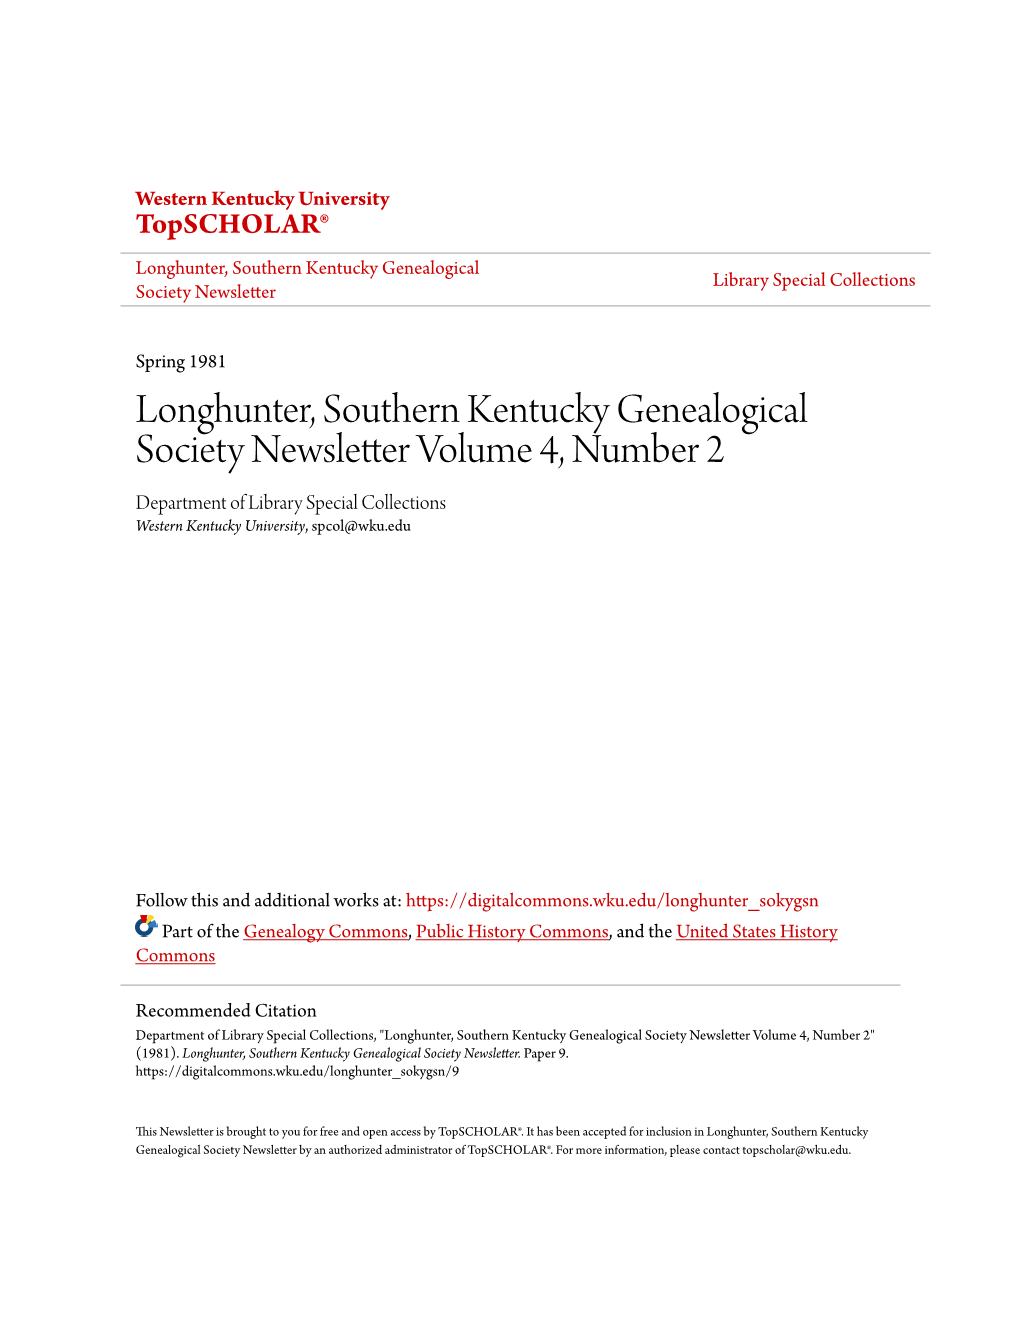 Longhunter, Southern Kentucky Genealogical Society Newsletter Volume 4, Number 2 Department of Library Special Collections Western Kentucky University, Spcol@Wku.Edu